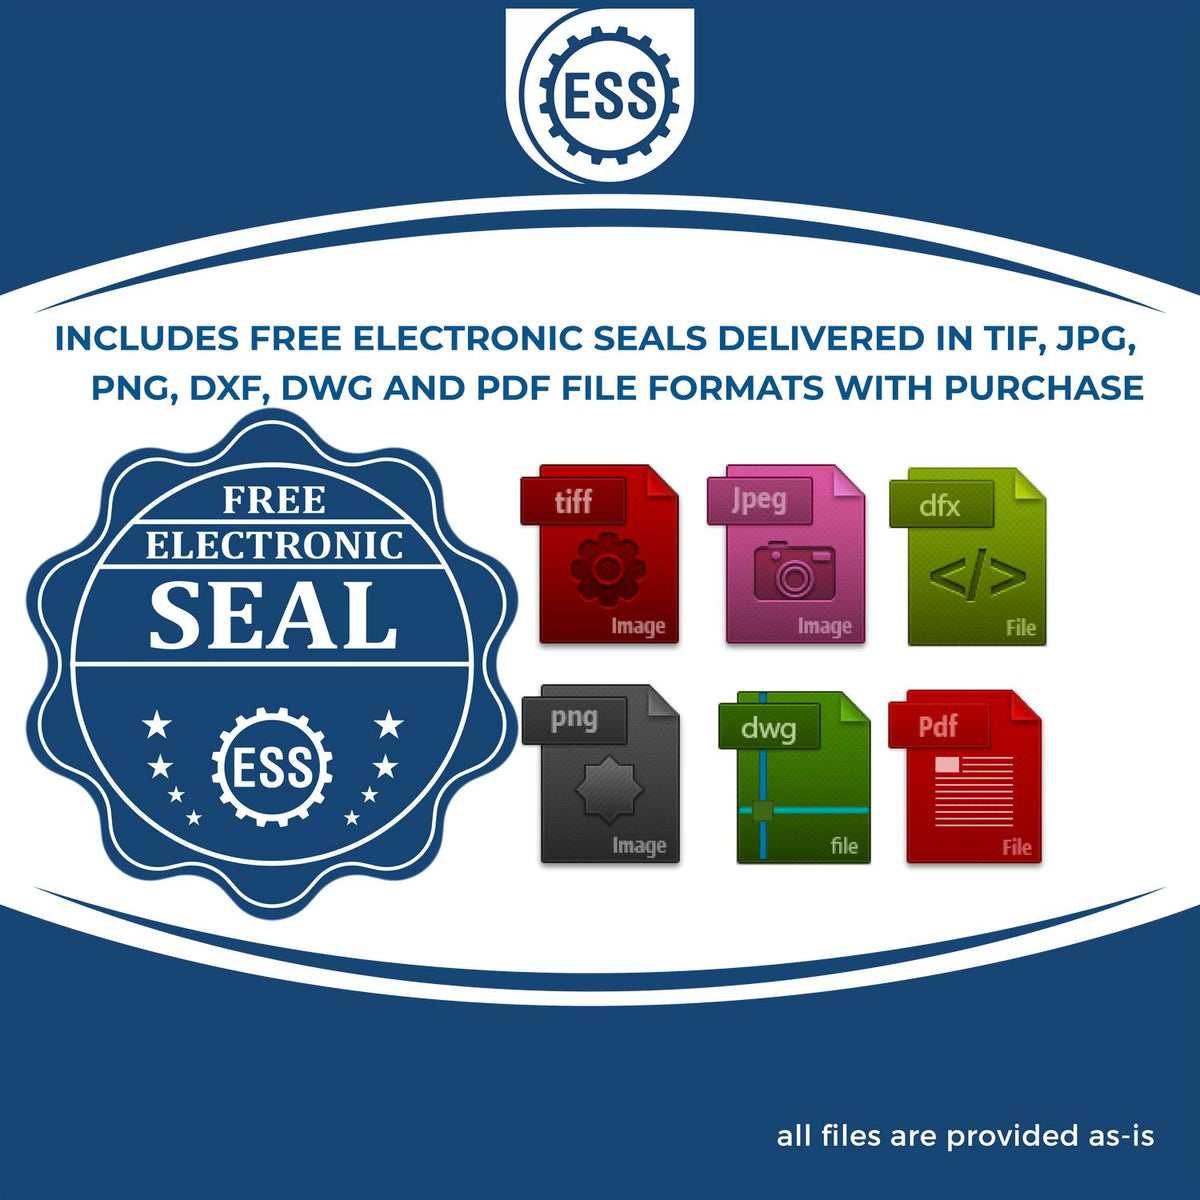 An infographic for the free electronic seal for the Slim Pre-Inked Wisconsin Landscape Architect Seal Stamp illustrating the different file type icons such as DXF, DWG, TIF, JPG and PNG.